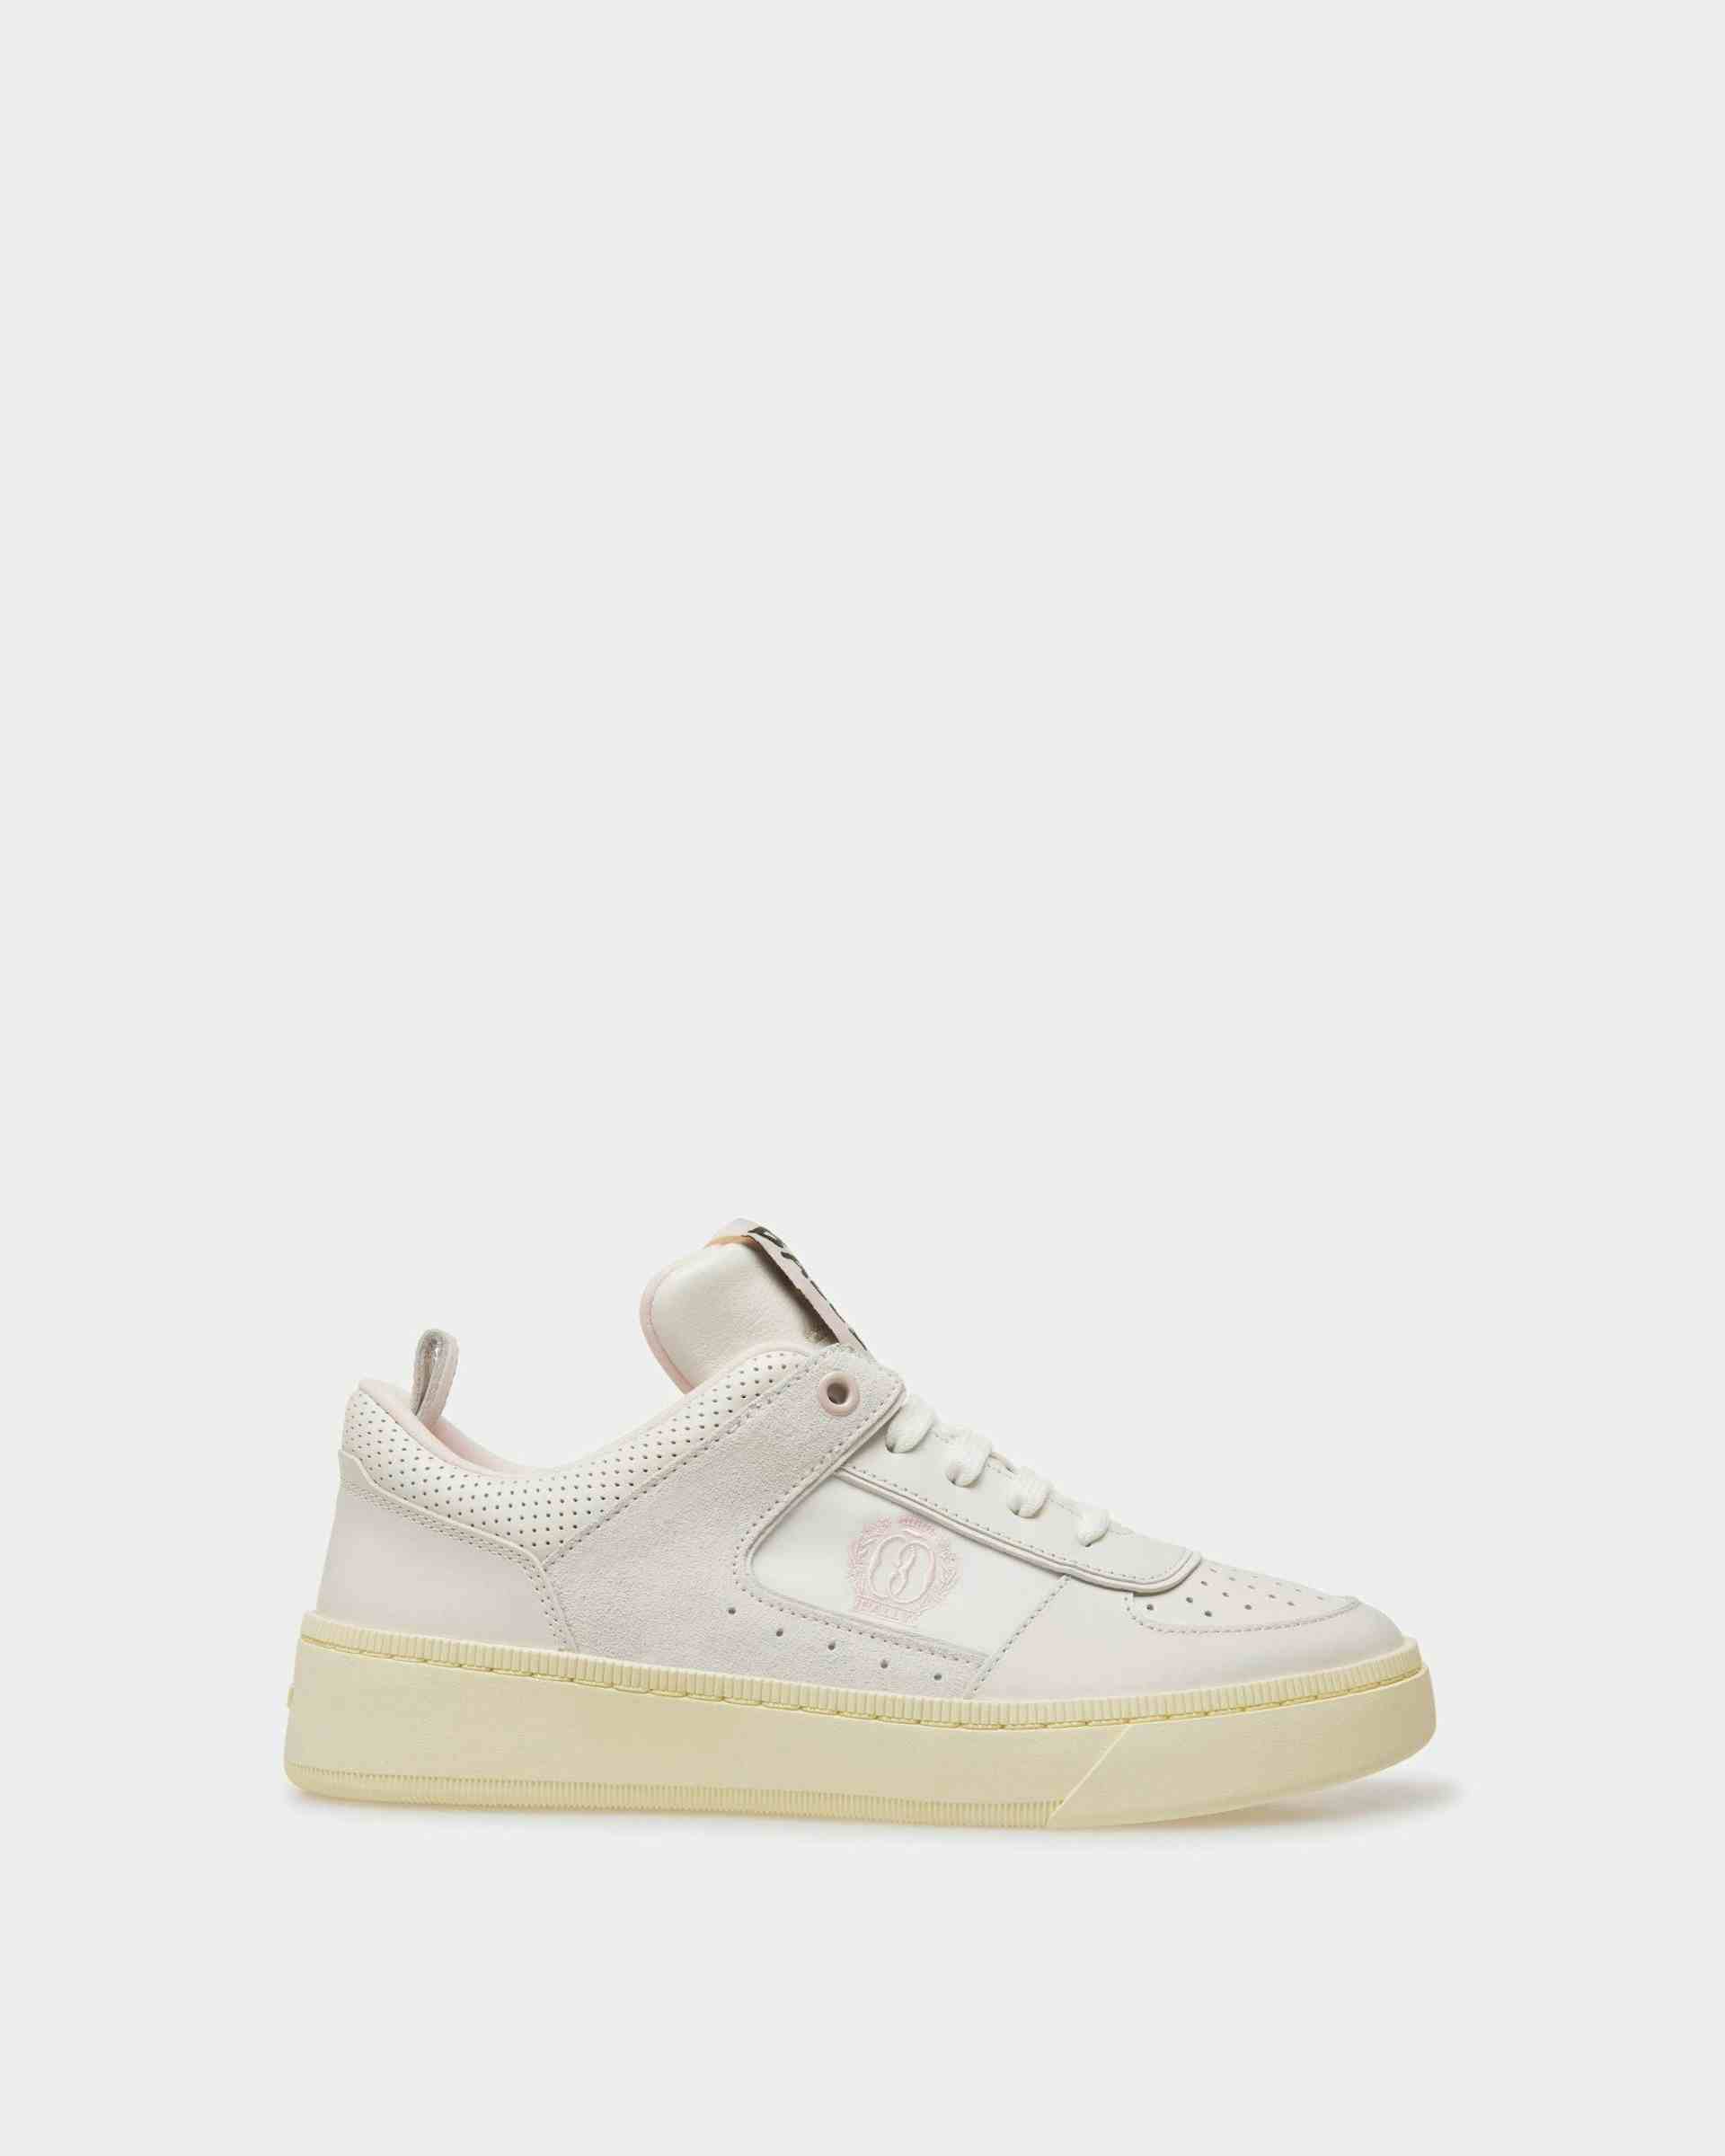 Raise Sneakers In White And Pink Leather - Women's - Bally